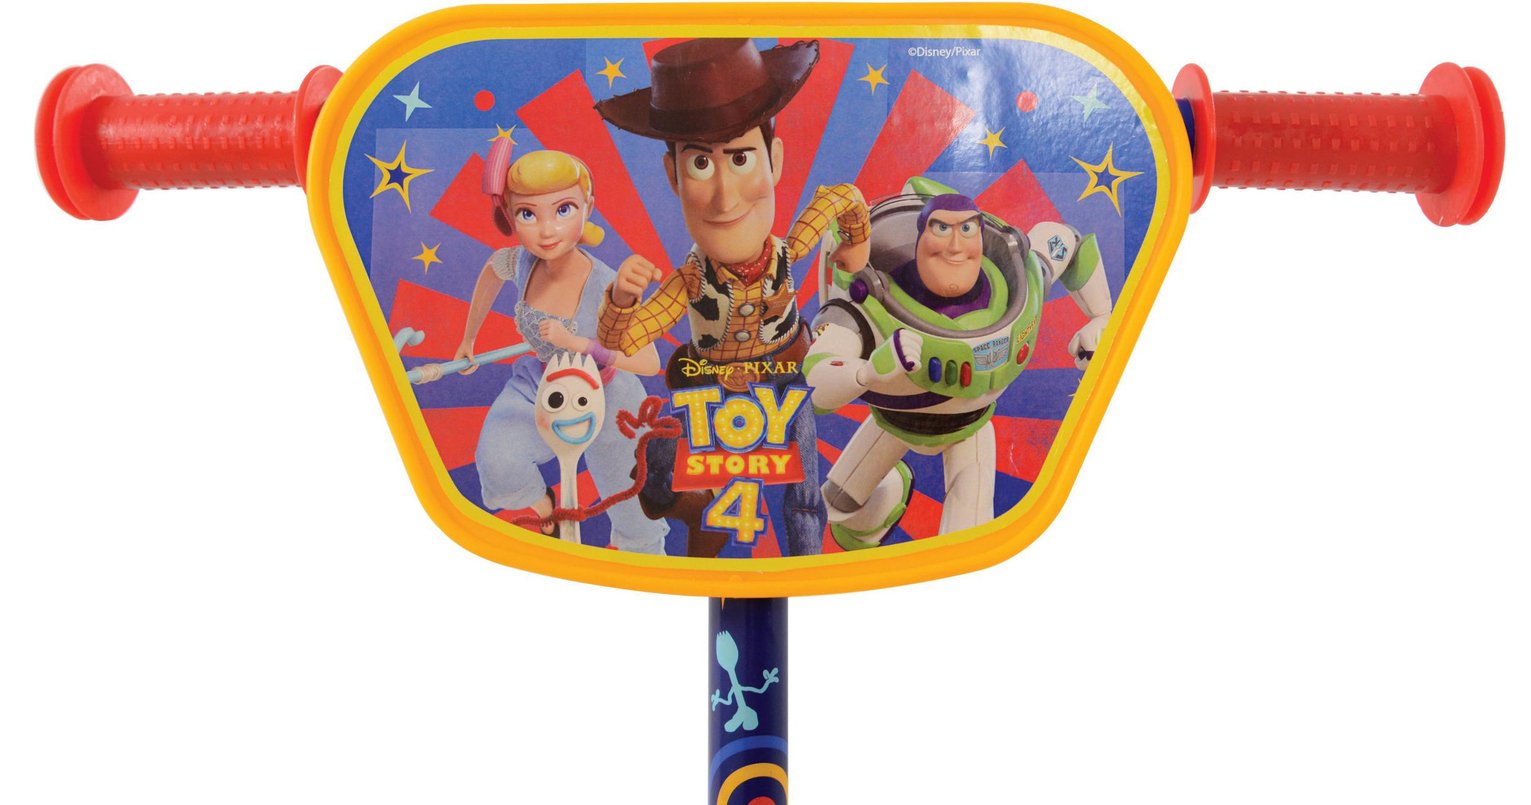 Toy Story Tri Scooter Review